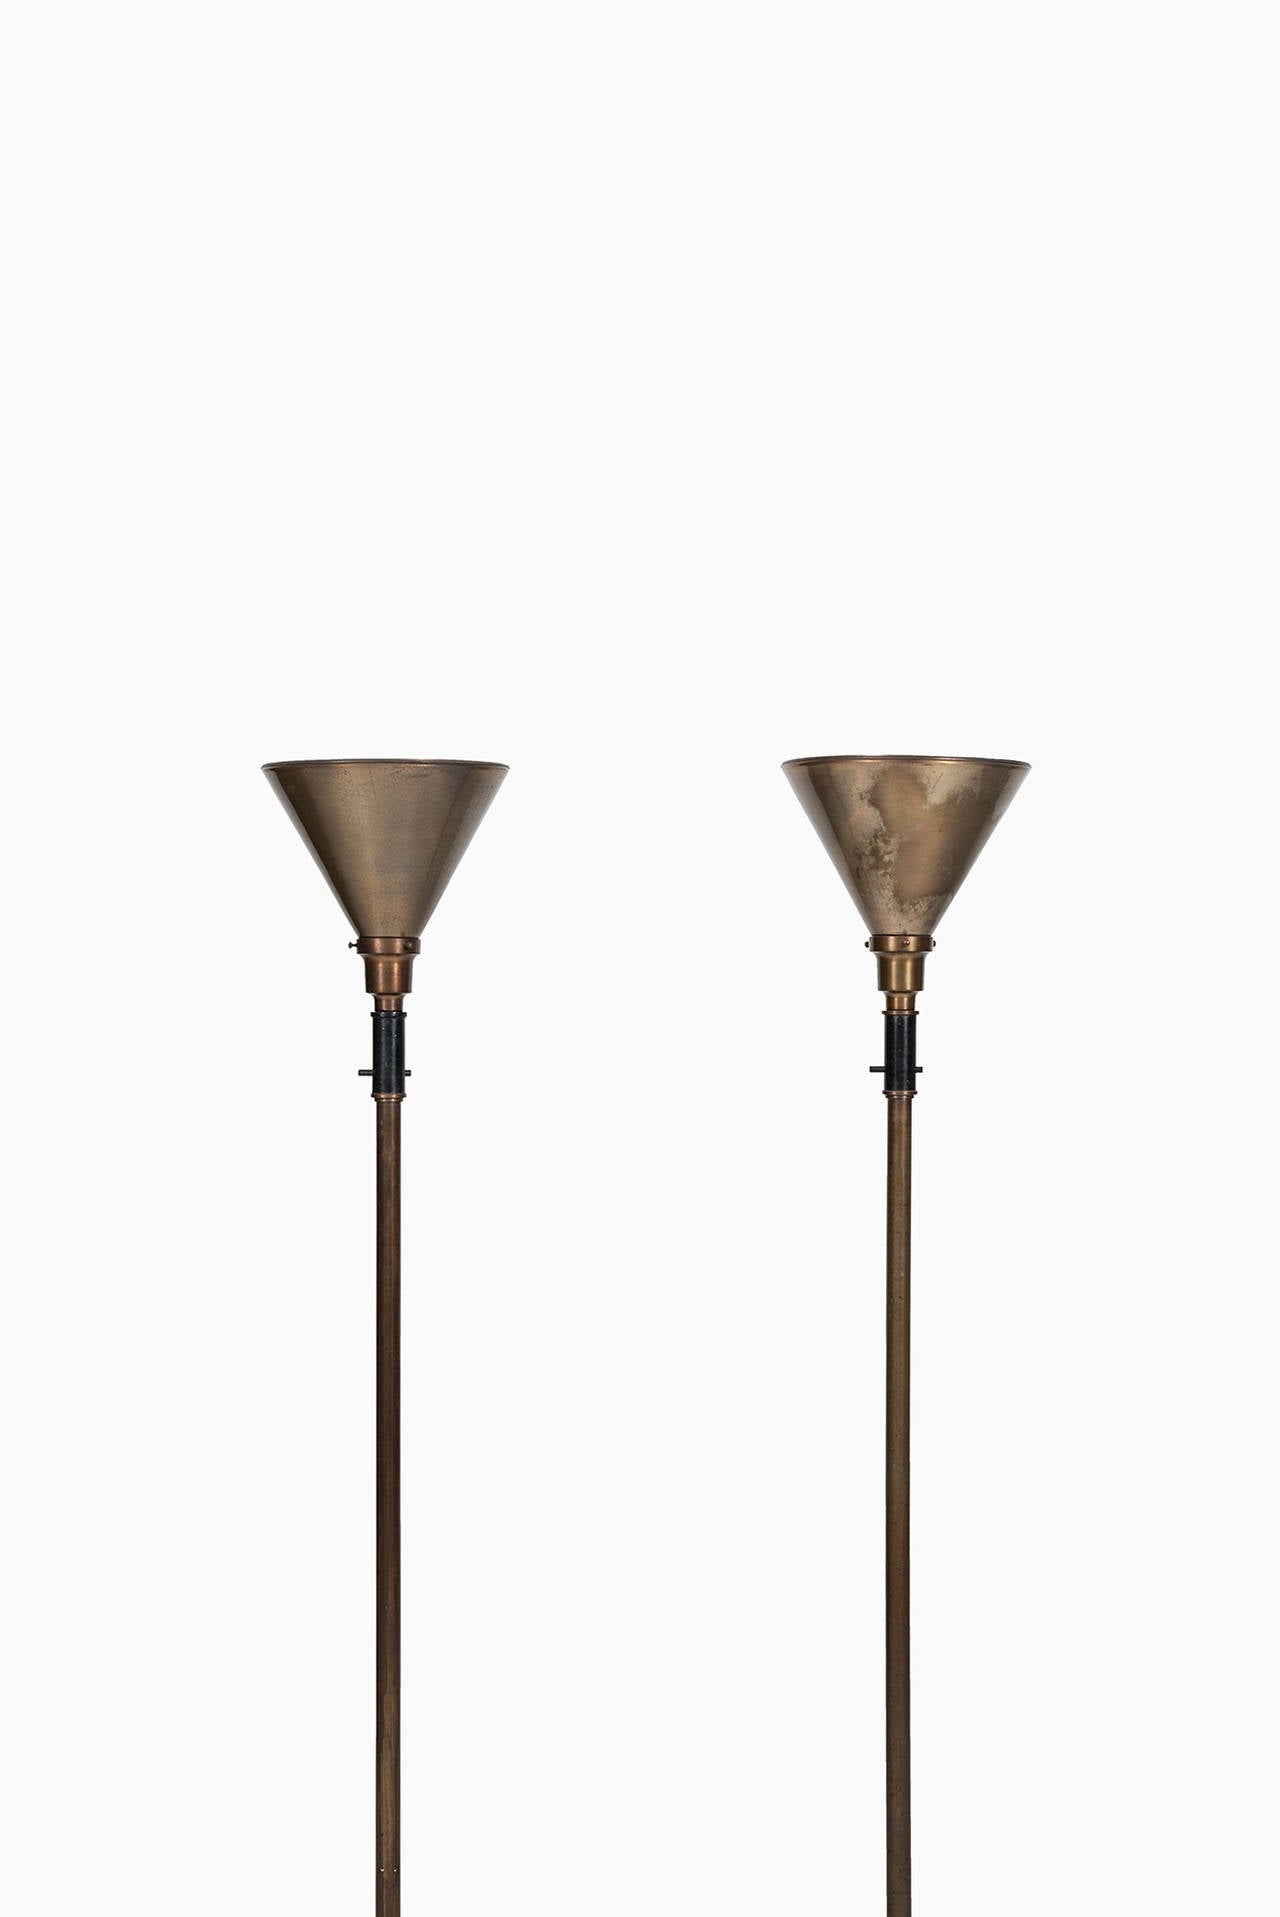 Rare pair of floor lamps / uplights from the 1930's produced by Fog & Mørup in Denmark.